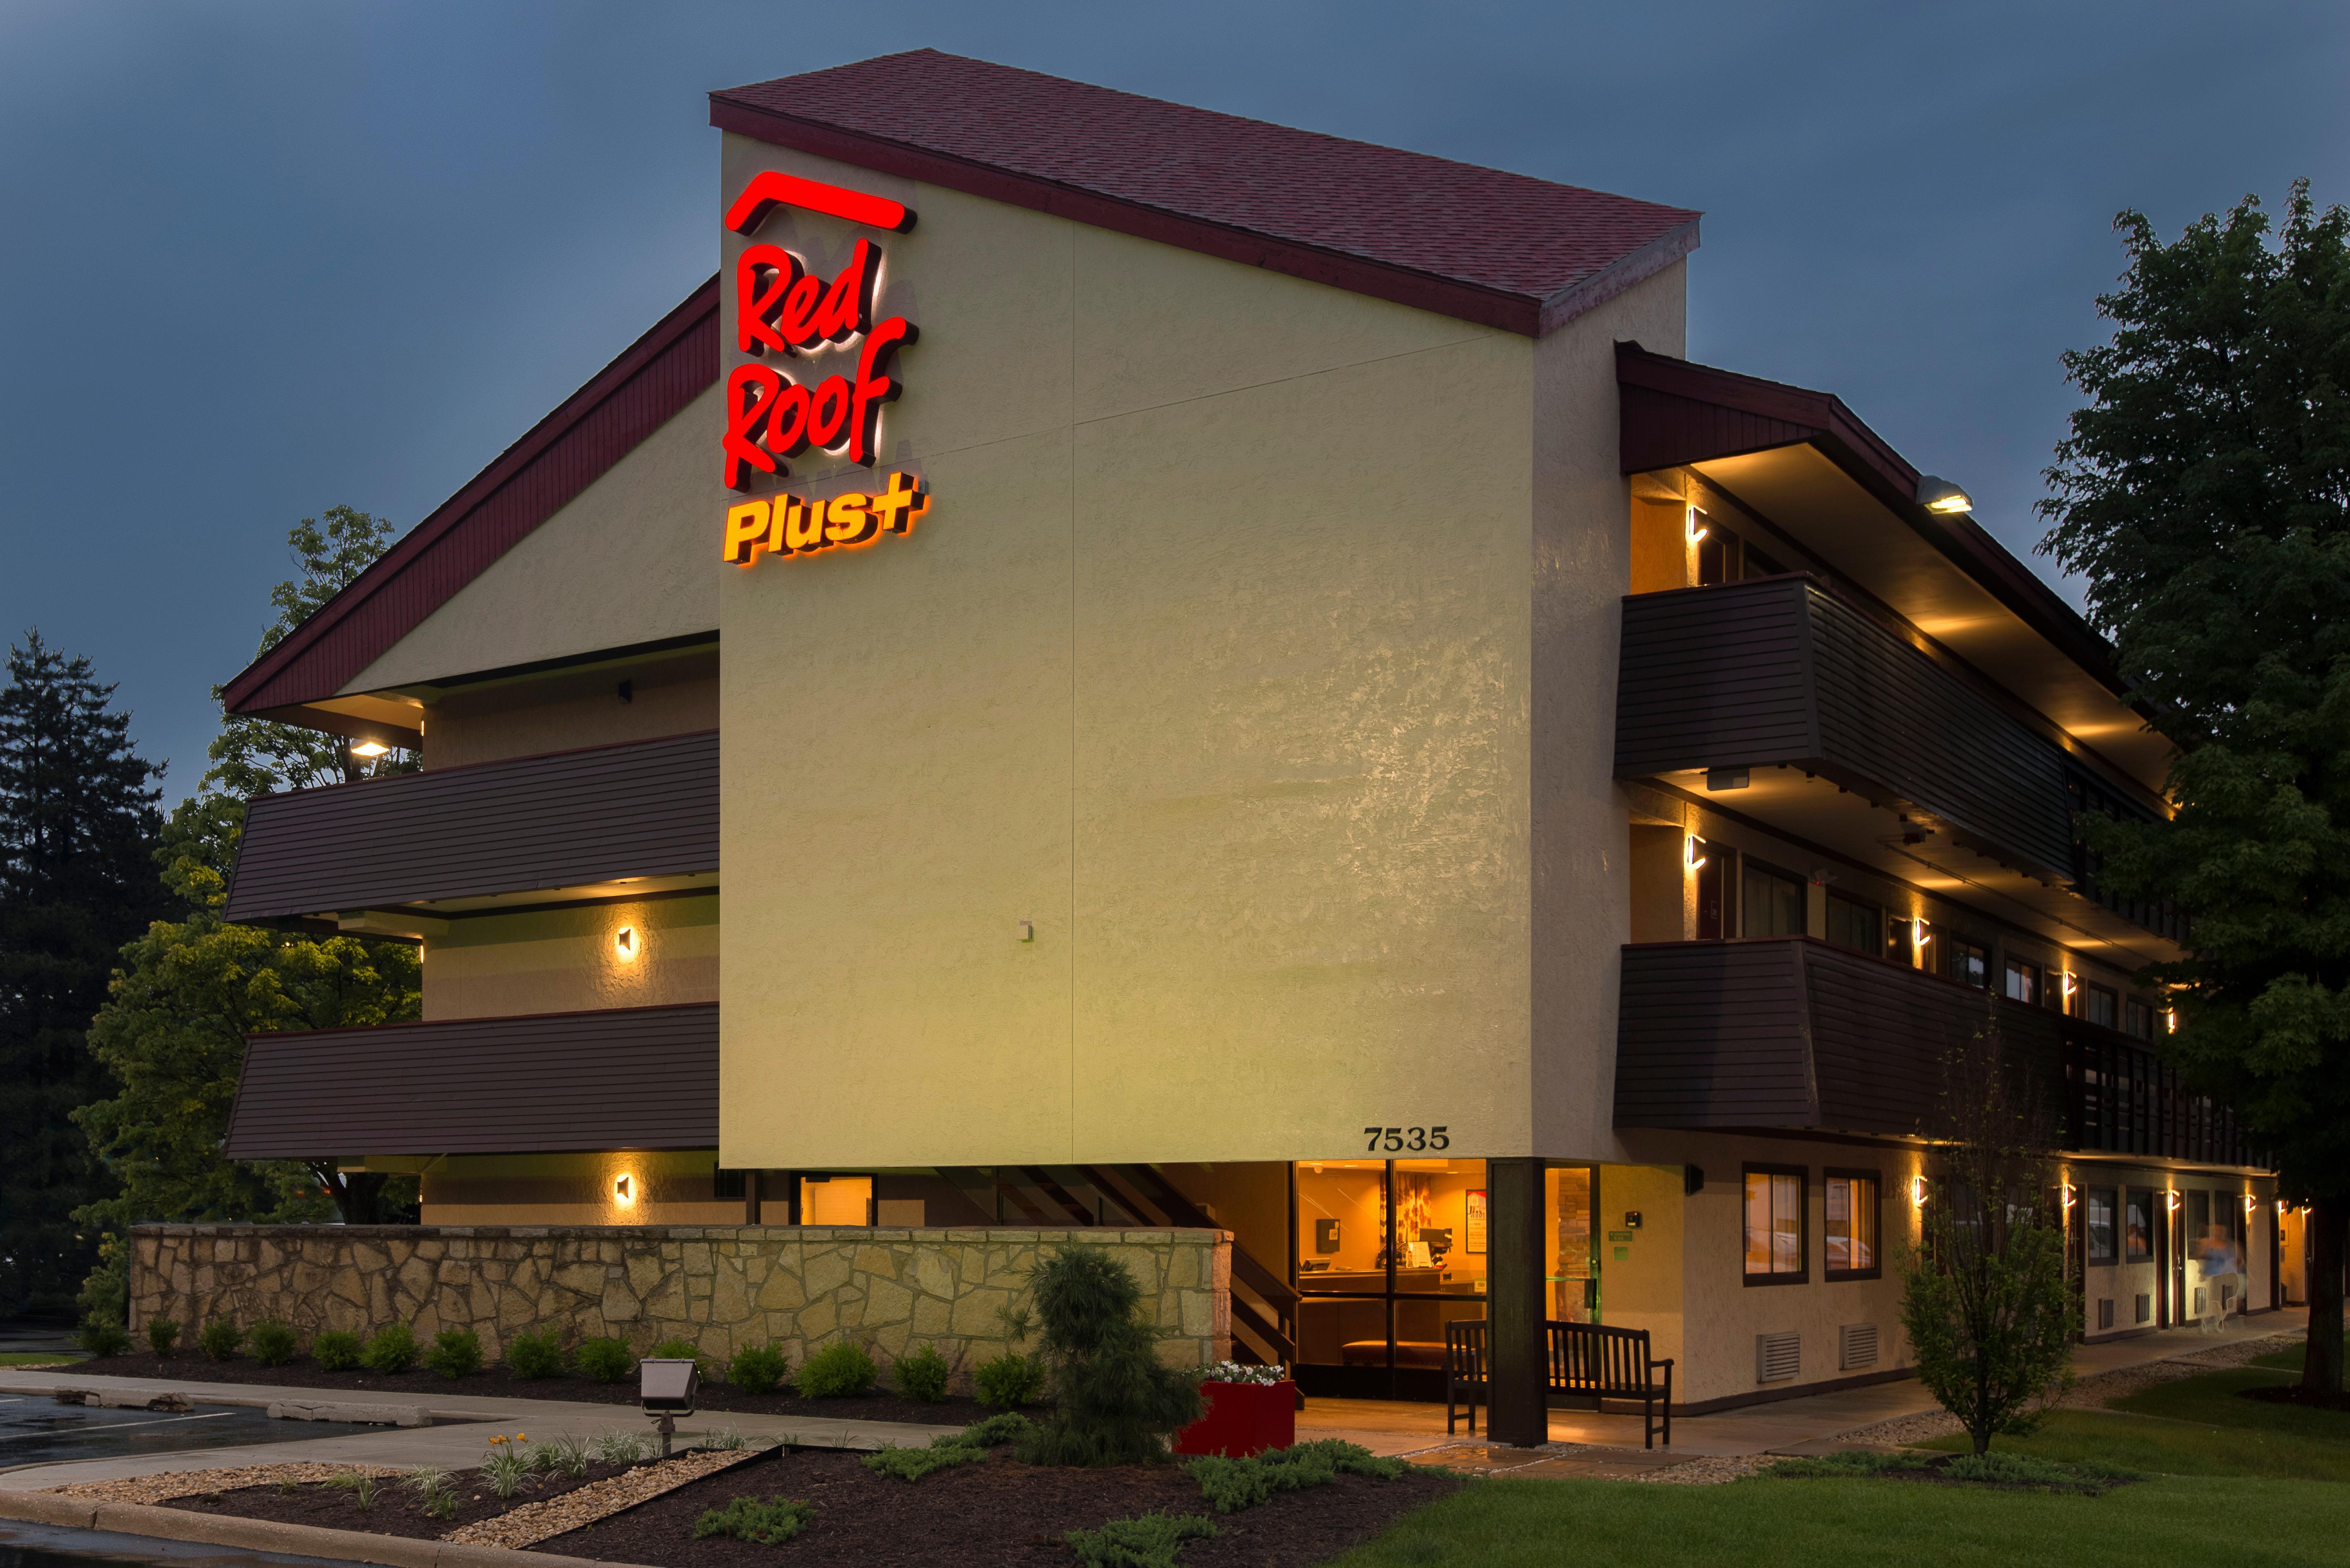 Red Roof Inn Plus+ Chicago - Willowbrook Buitenkant foto